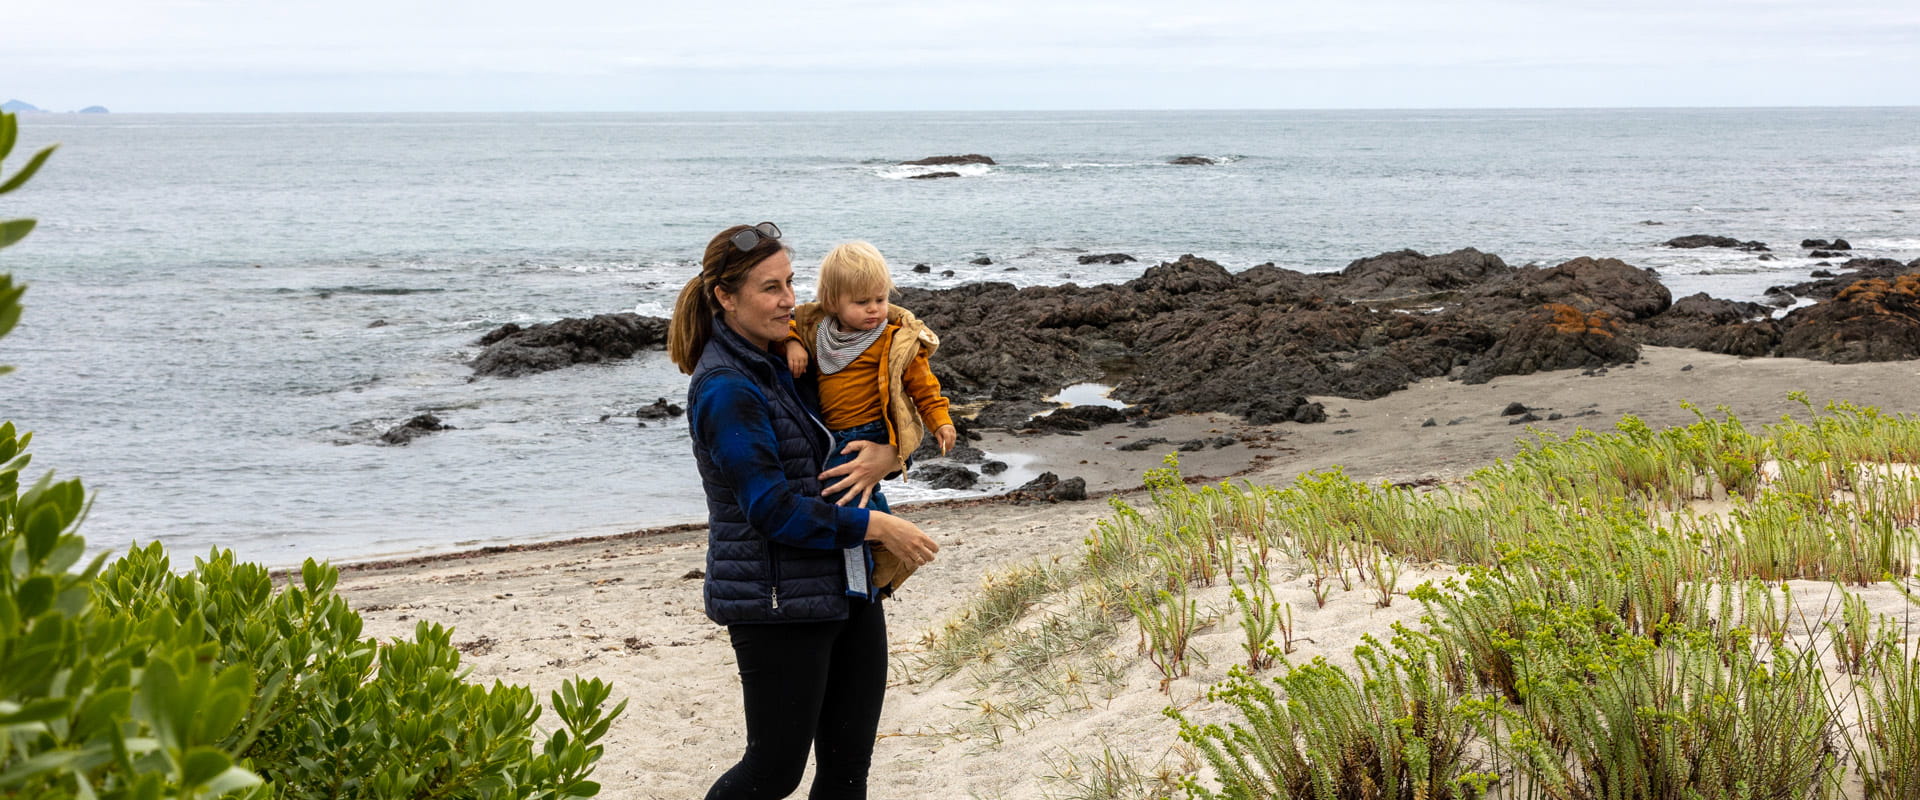 A woman holds a young child in her arms as they walk along the sandy beach with the rocky shoreline behind them.